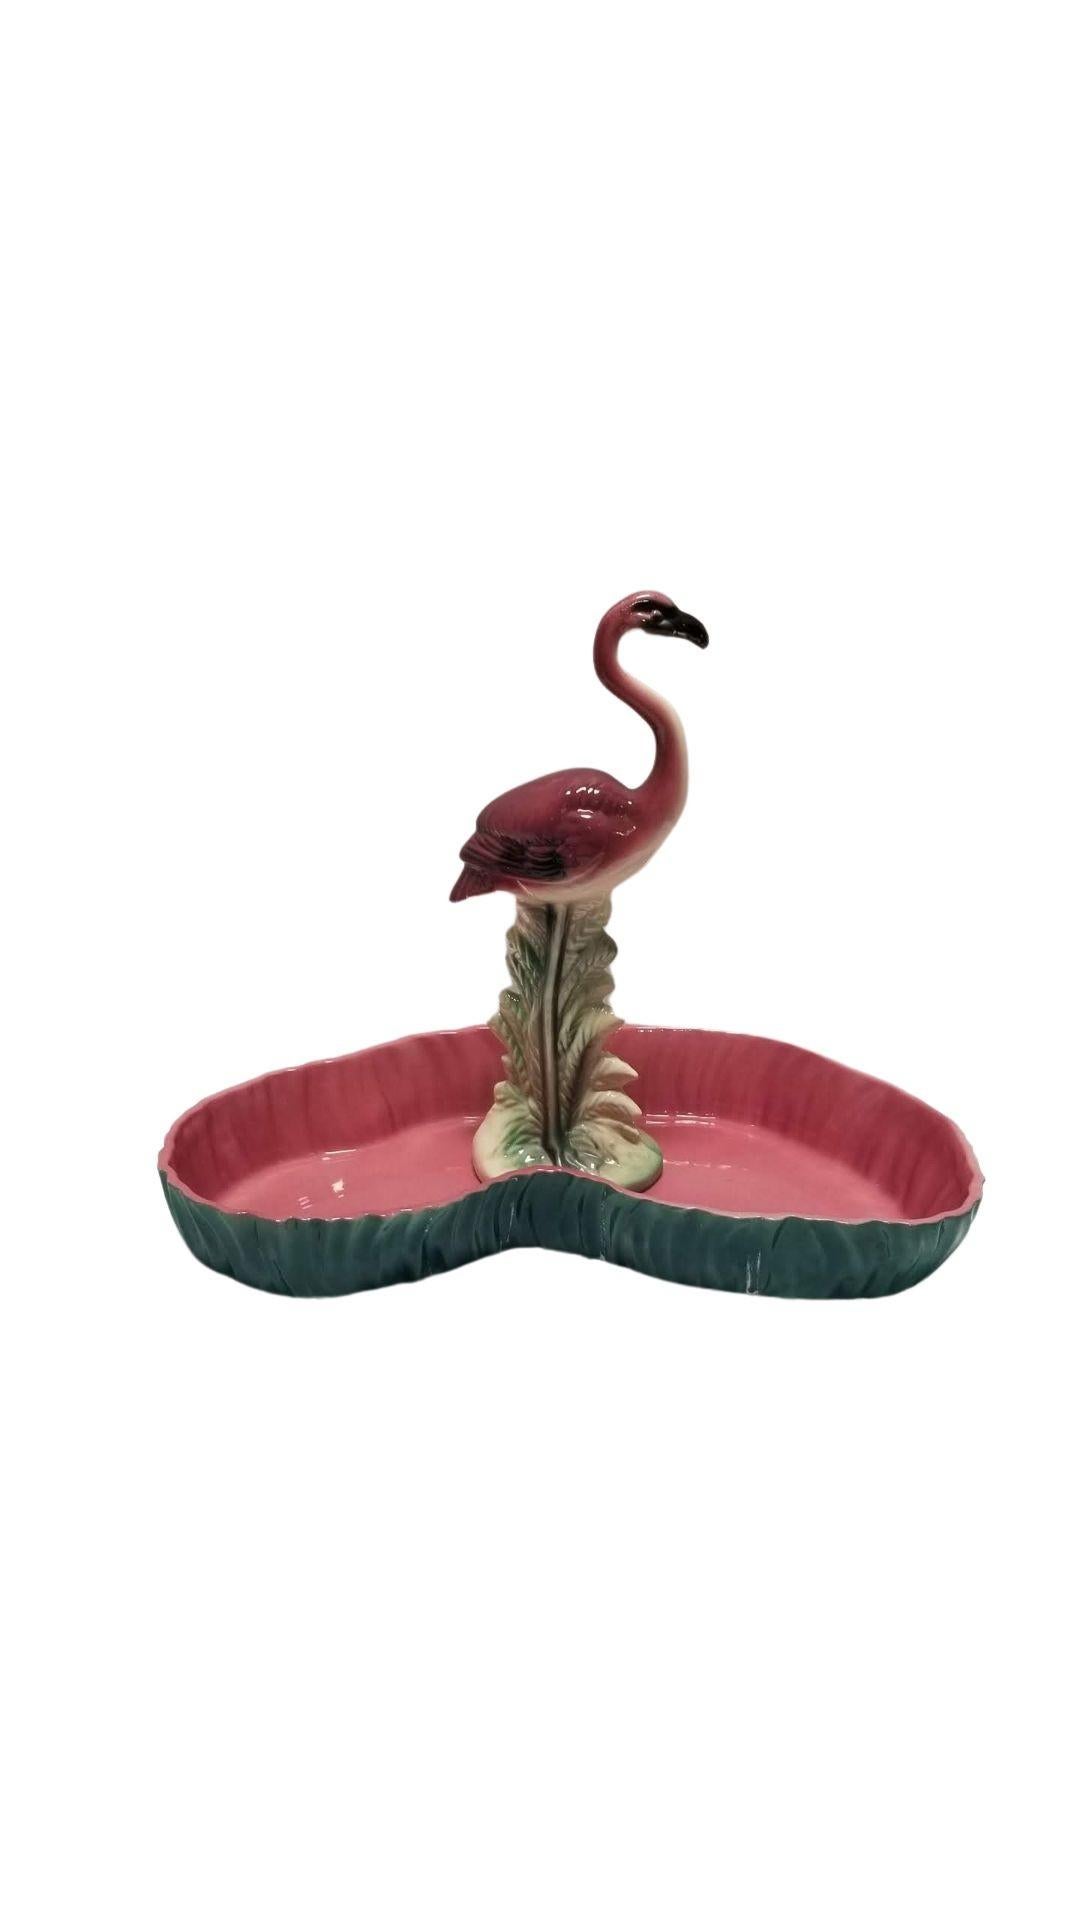 20th Century Mid Century Pink and Green Flamingo Ceramic Figurine in Flamingo Pool Tray. For Sale